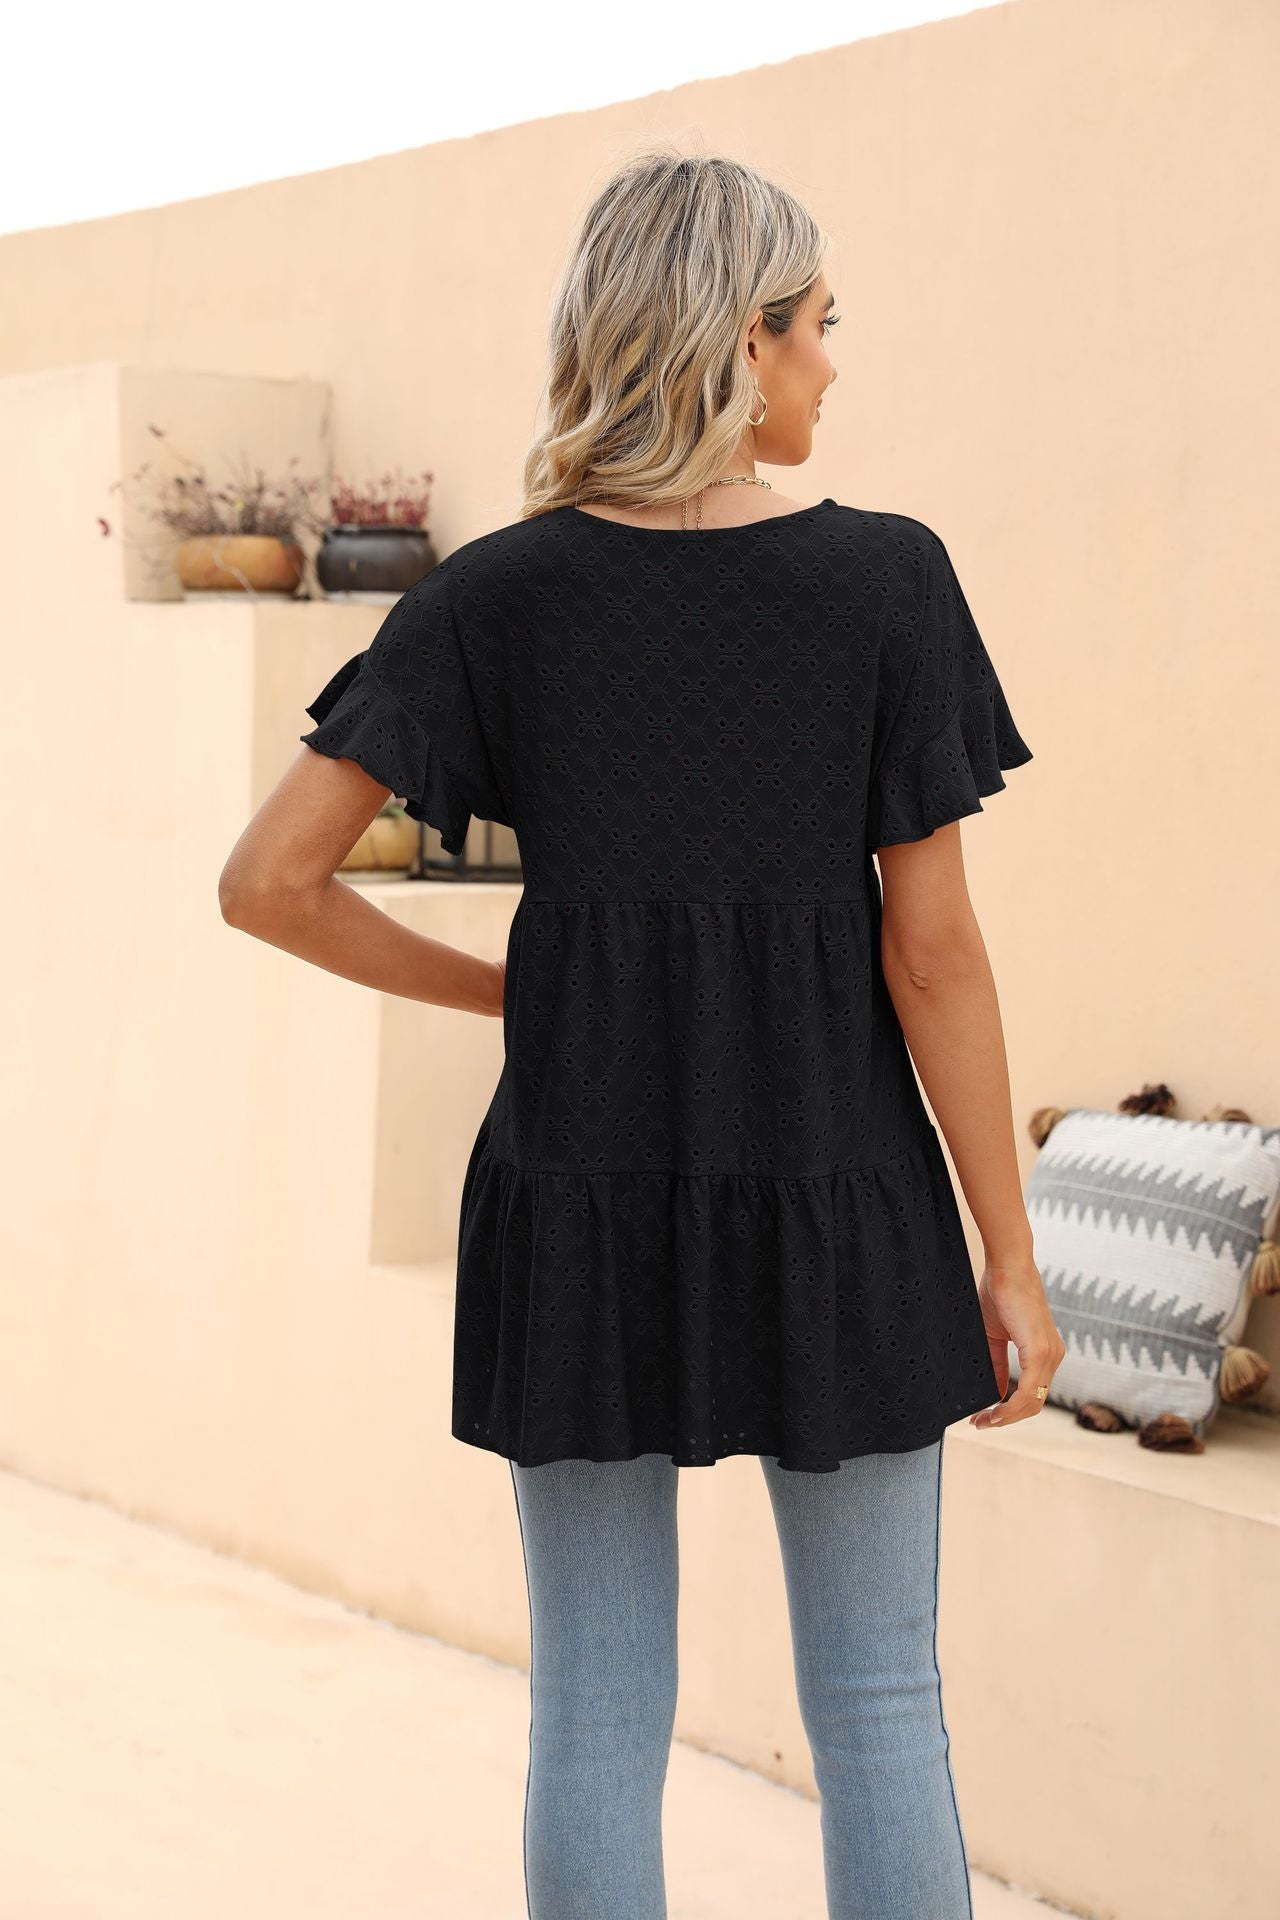 Openwork Round Neck Flounce Sleeve Blouse - Women’s Clothing & Accessories - Shirts & Tops - 12 - 2024